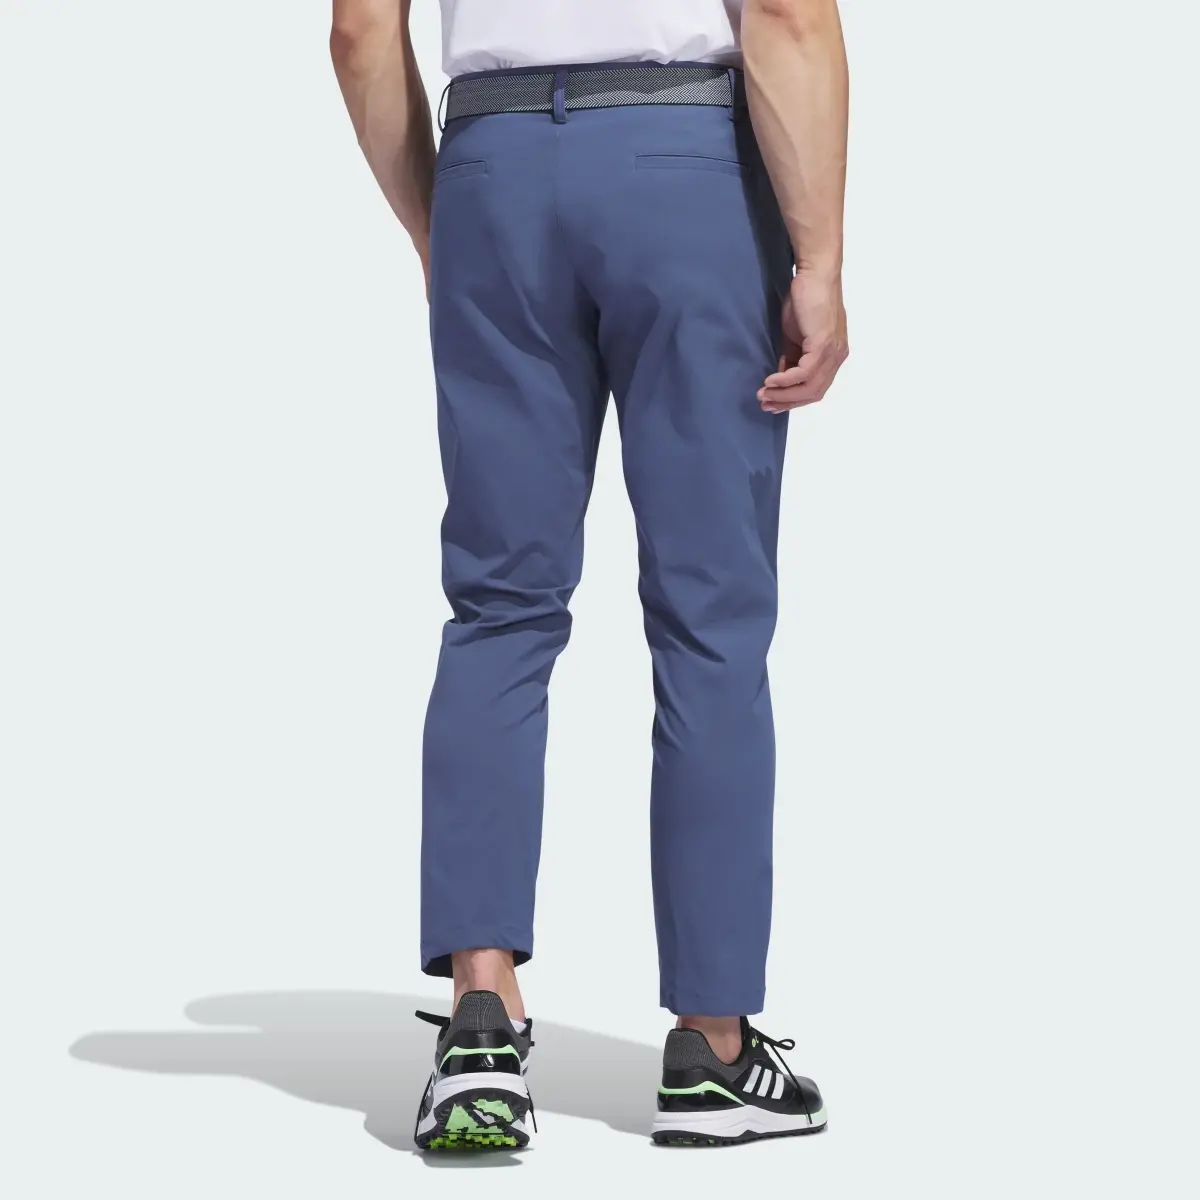 Adidas Ultimate365 Chino Trousers. 2